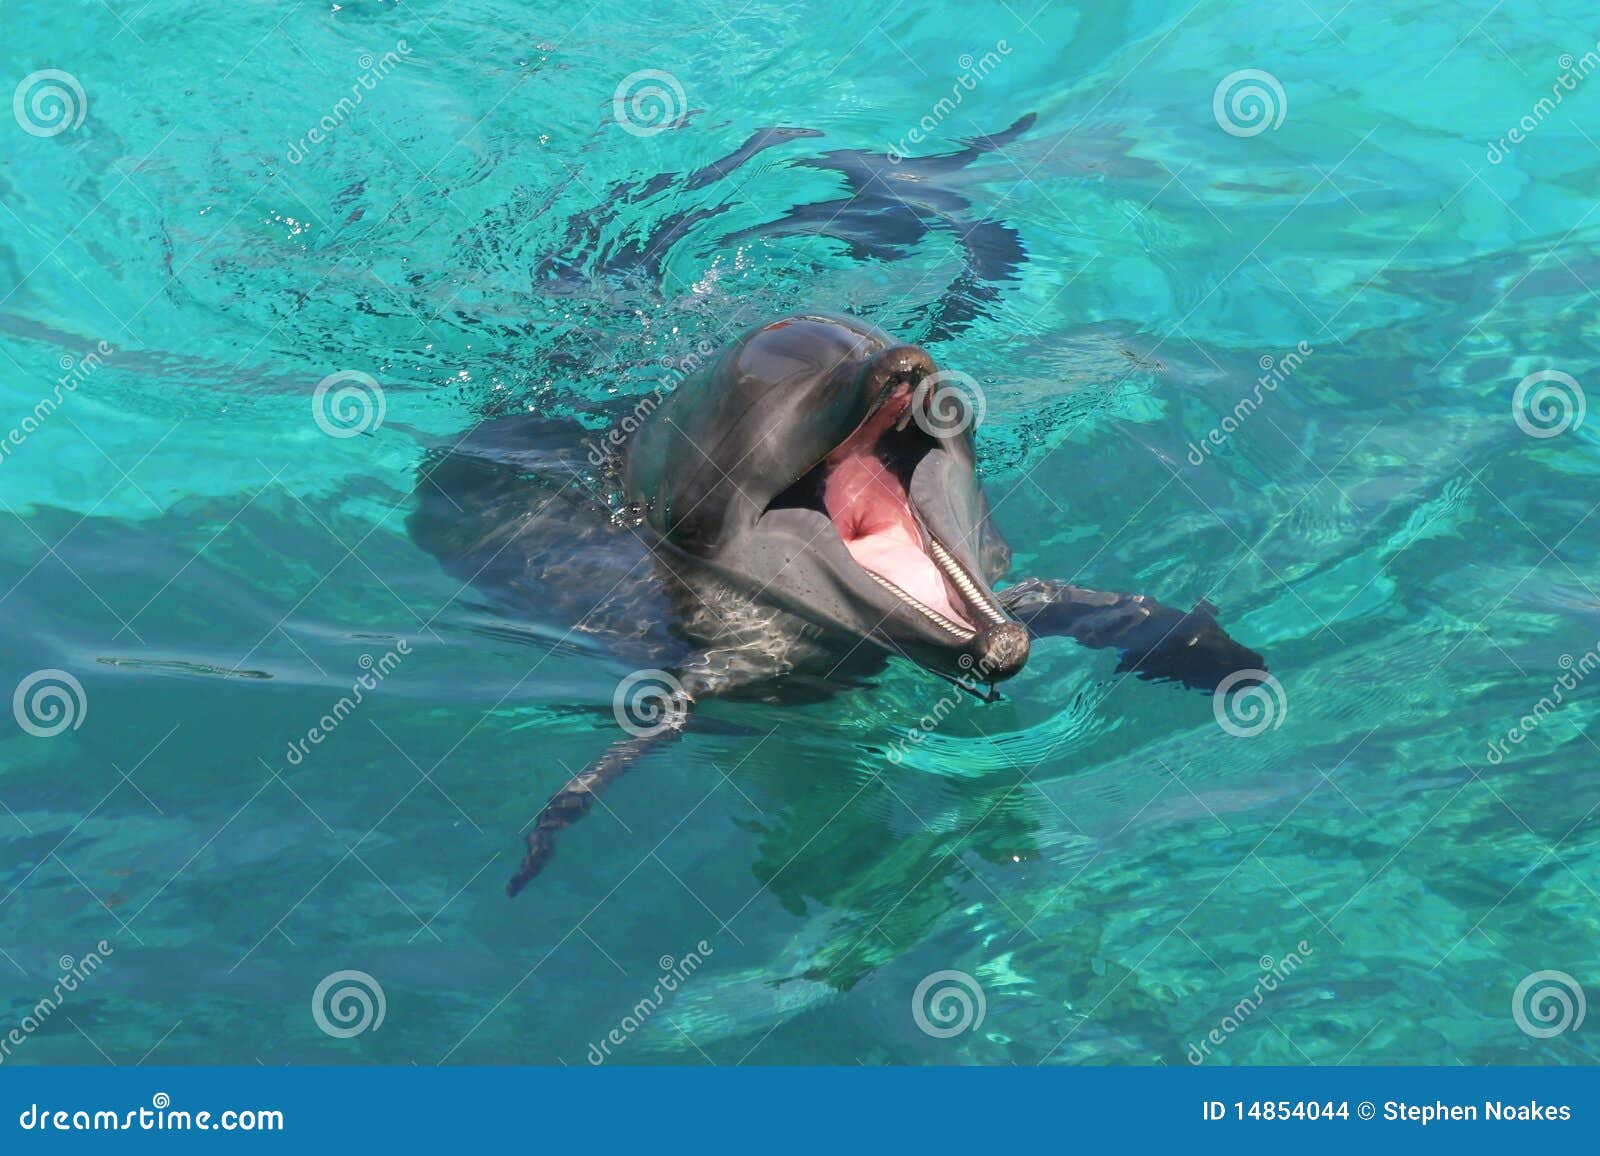 Dolphin With Mouth Open Stock Images - Image: 14854044